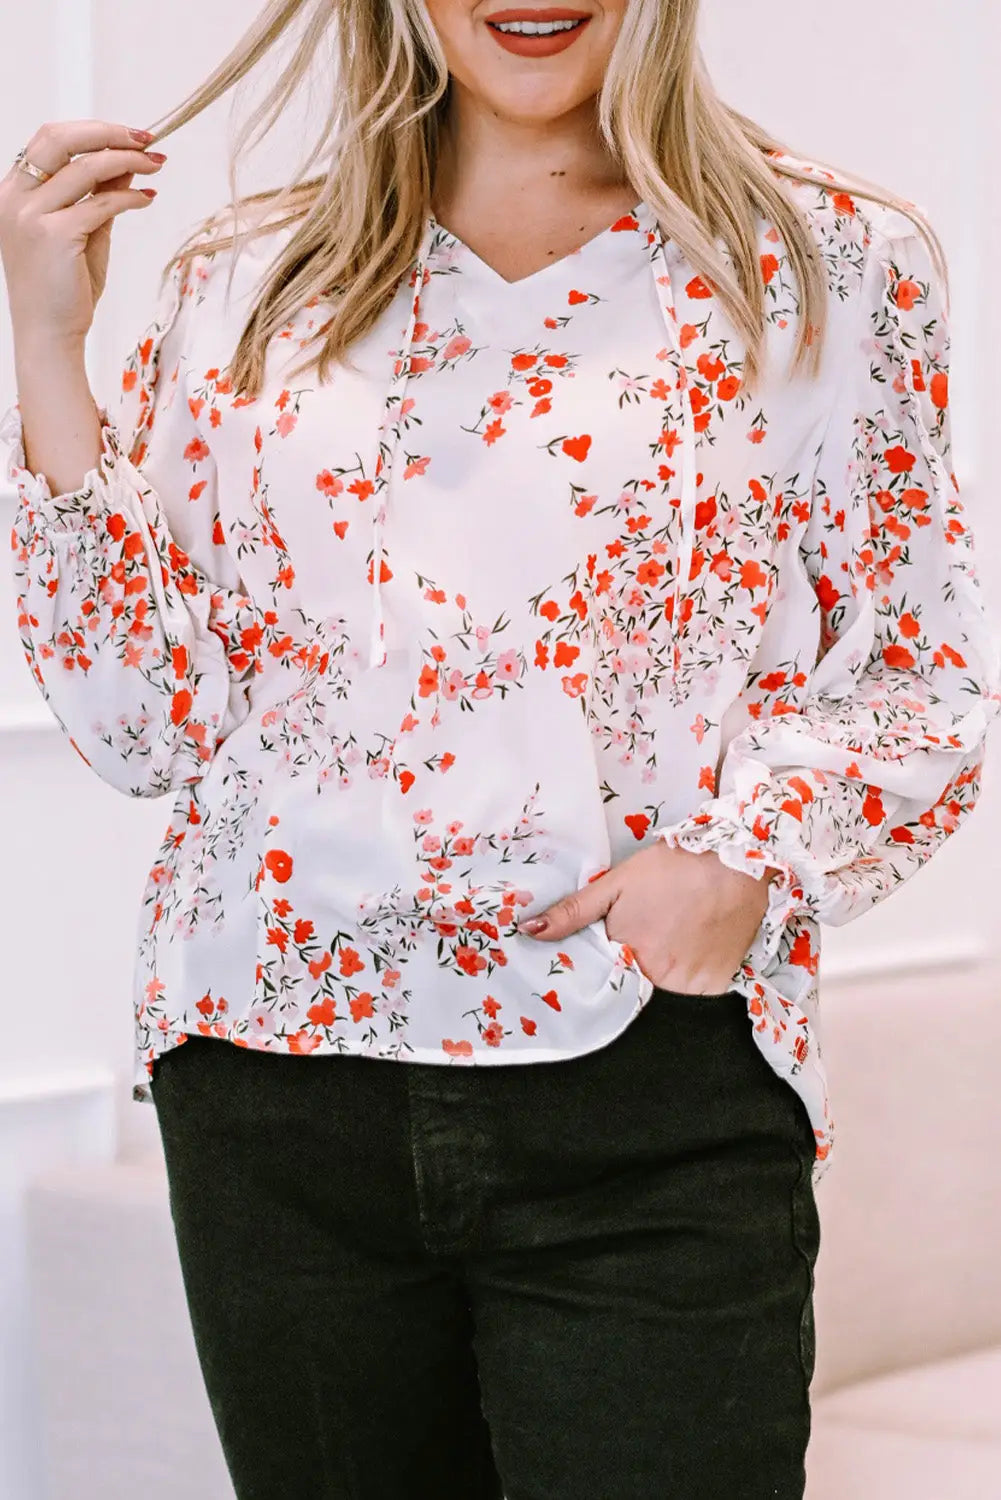 White split v neck floral plus size blouse with ruffles - 1x / 100% polyester